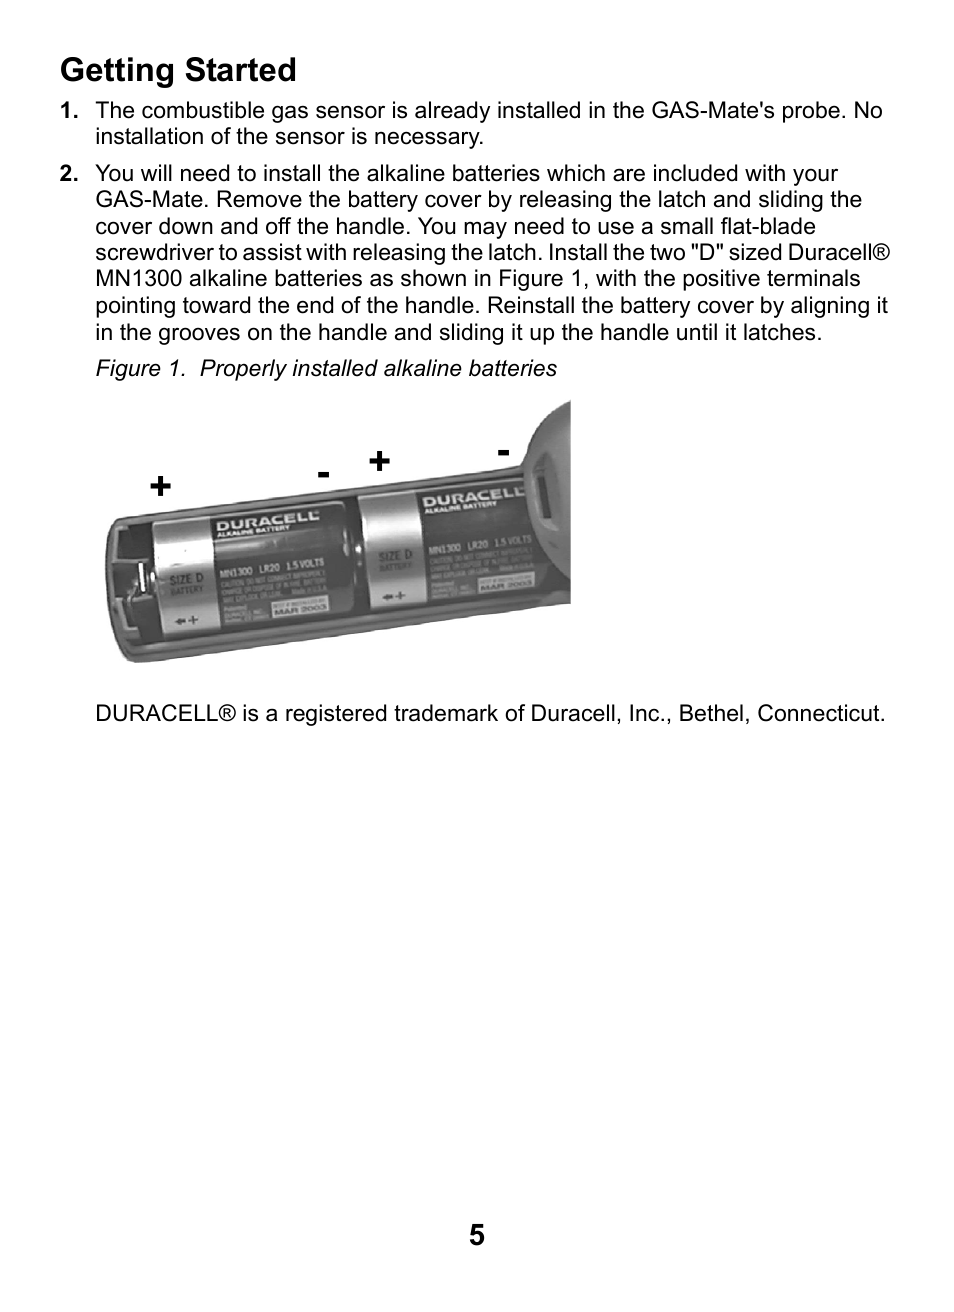 Getting started | INFICON GAS-Mate Combustible Gas Leak Detector User  Manual | Page 5 / 12 | Original mode